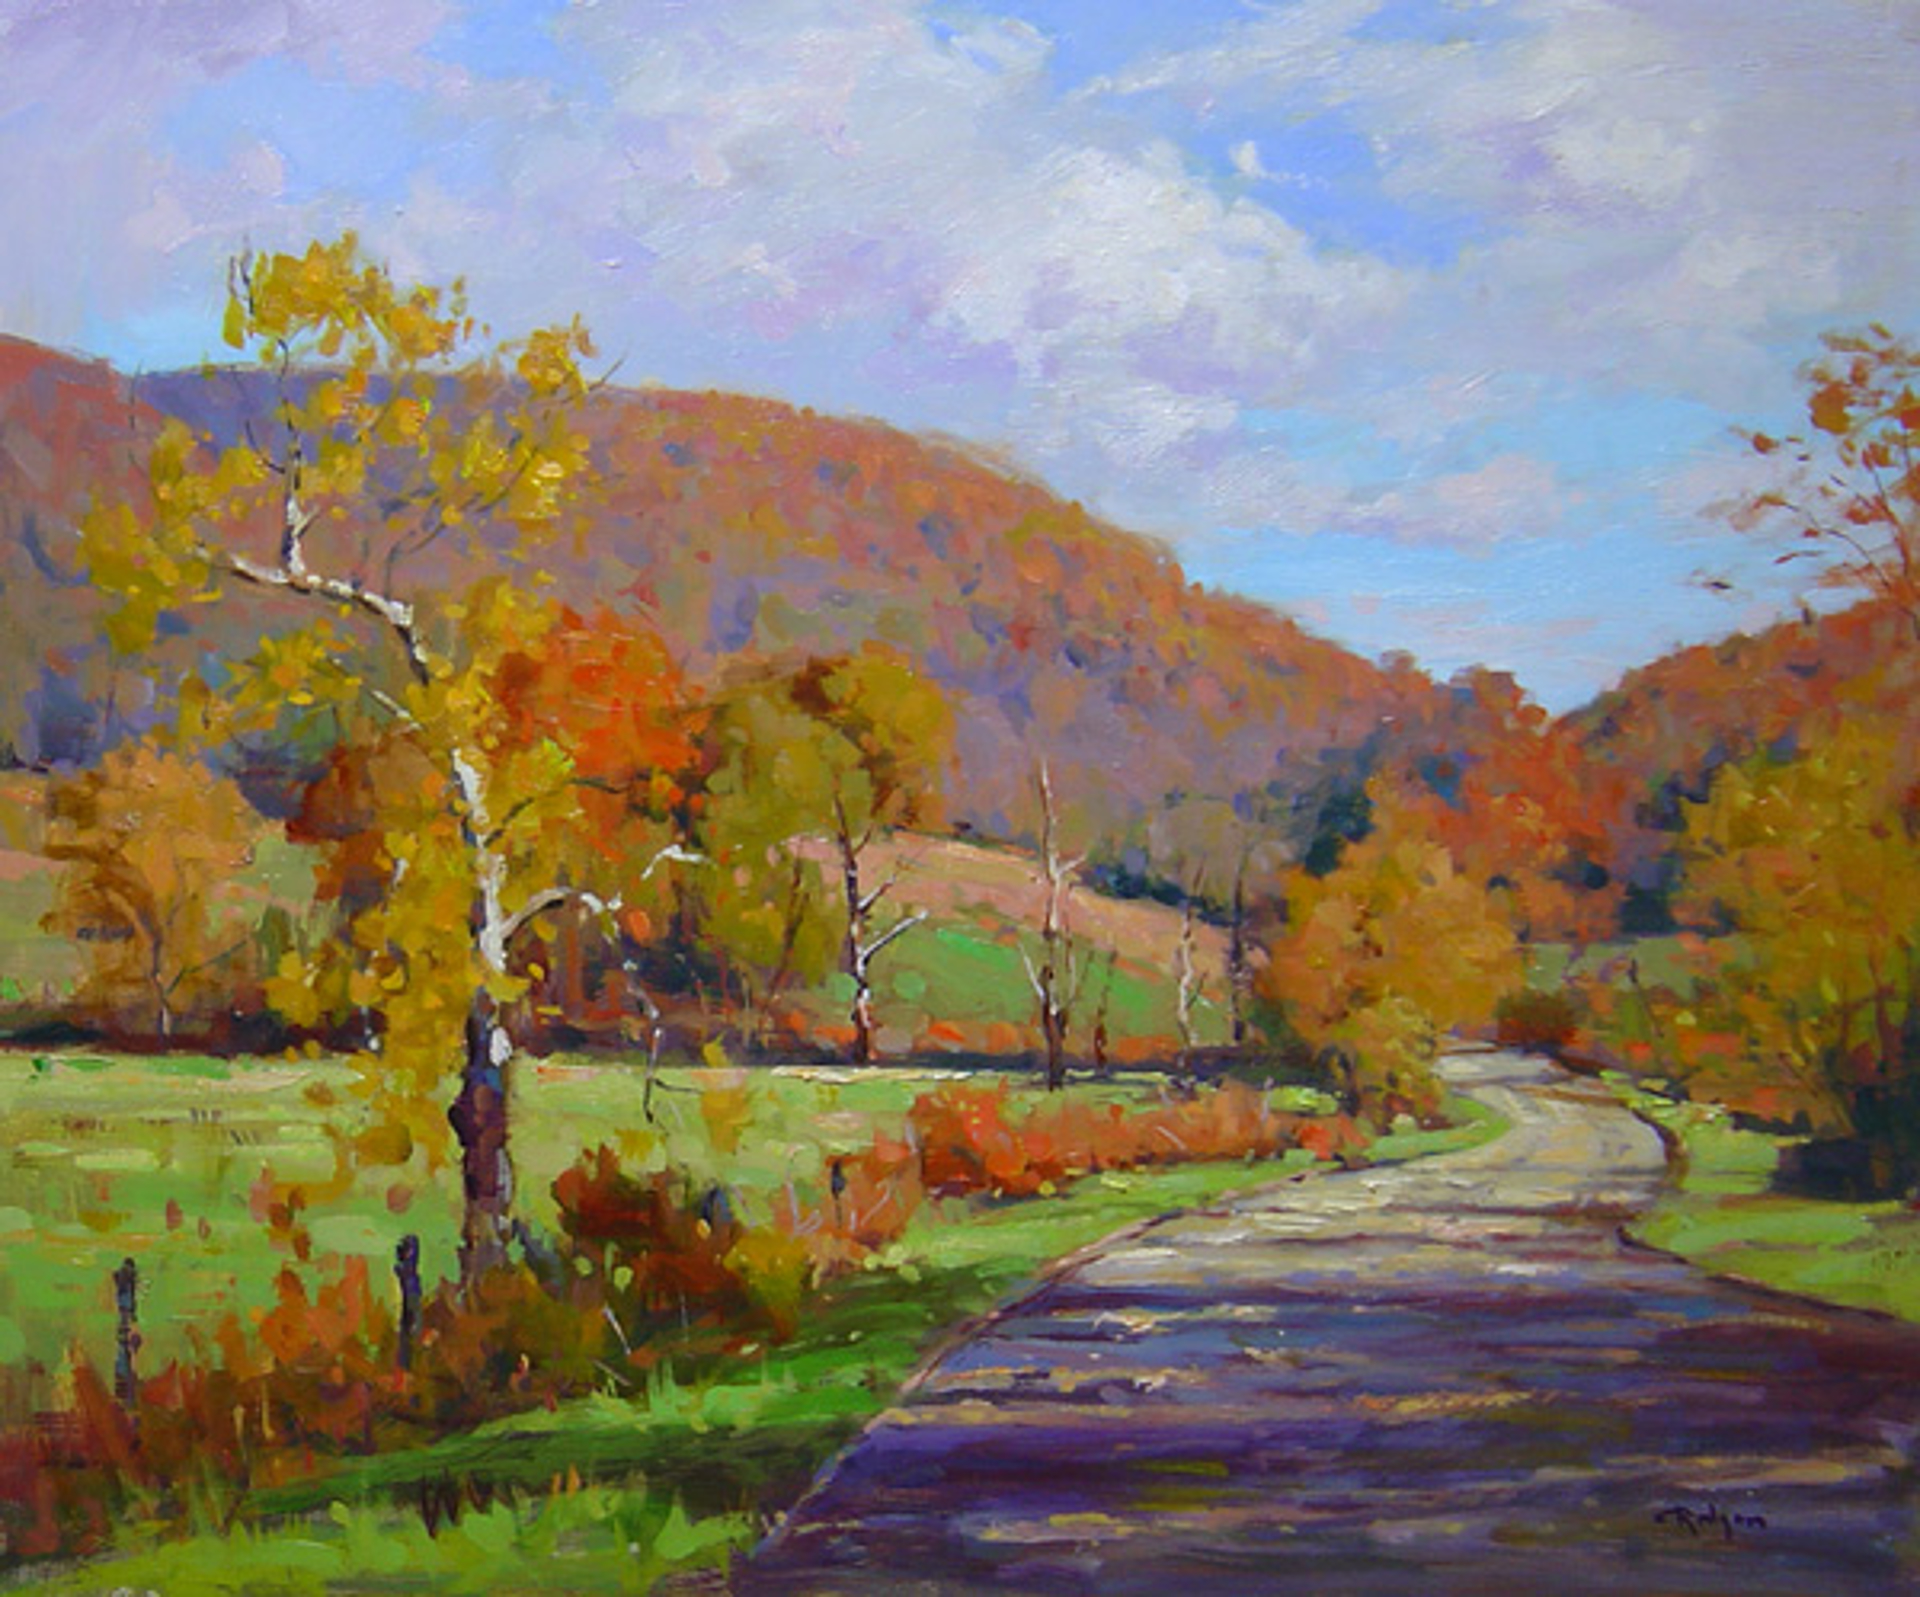 End of Autumn, Shenandoah by Jim Rodgers